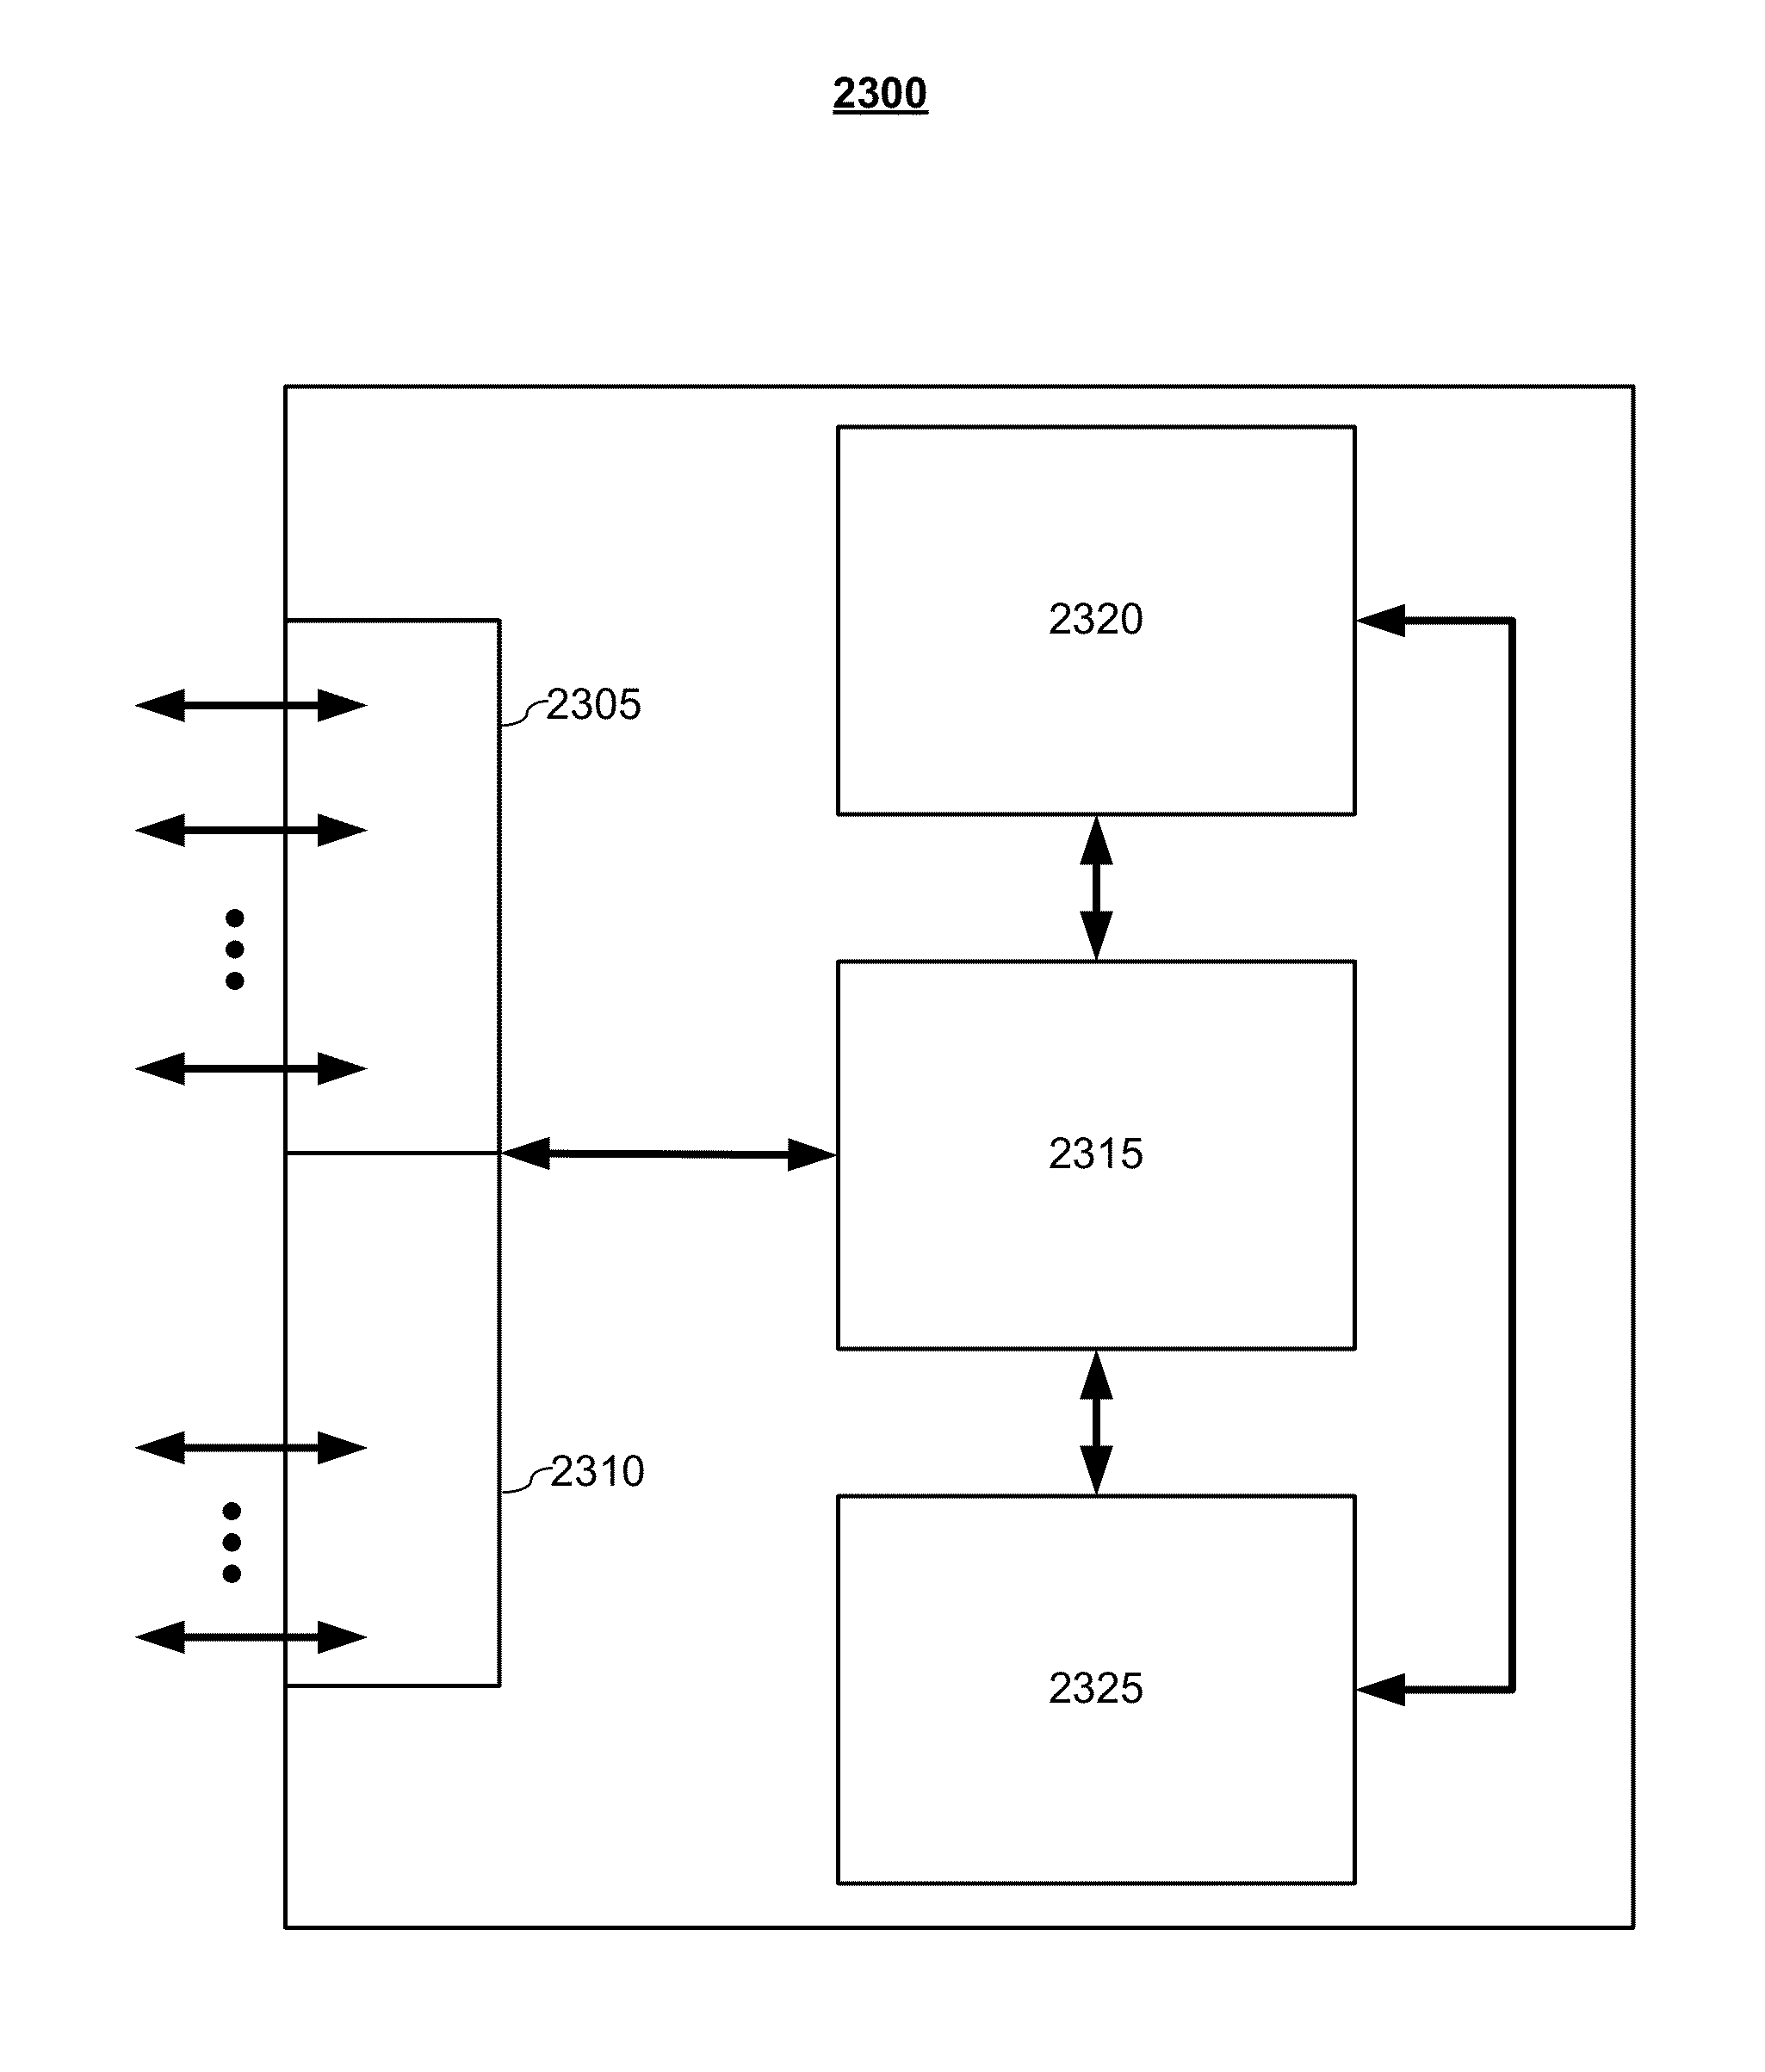 N-node virtual link trunking (VLT) systems and methods